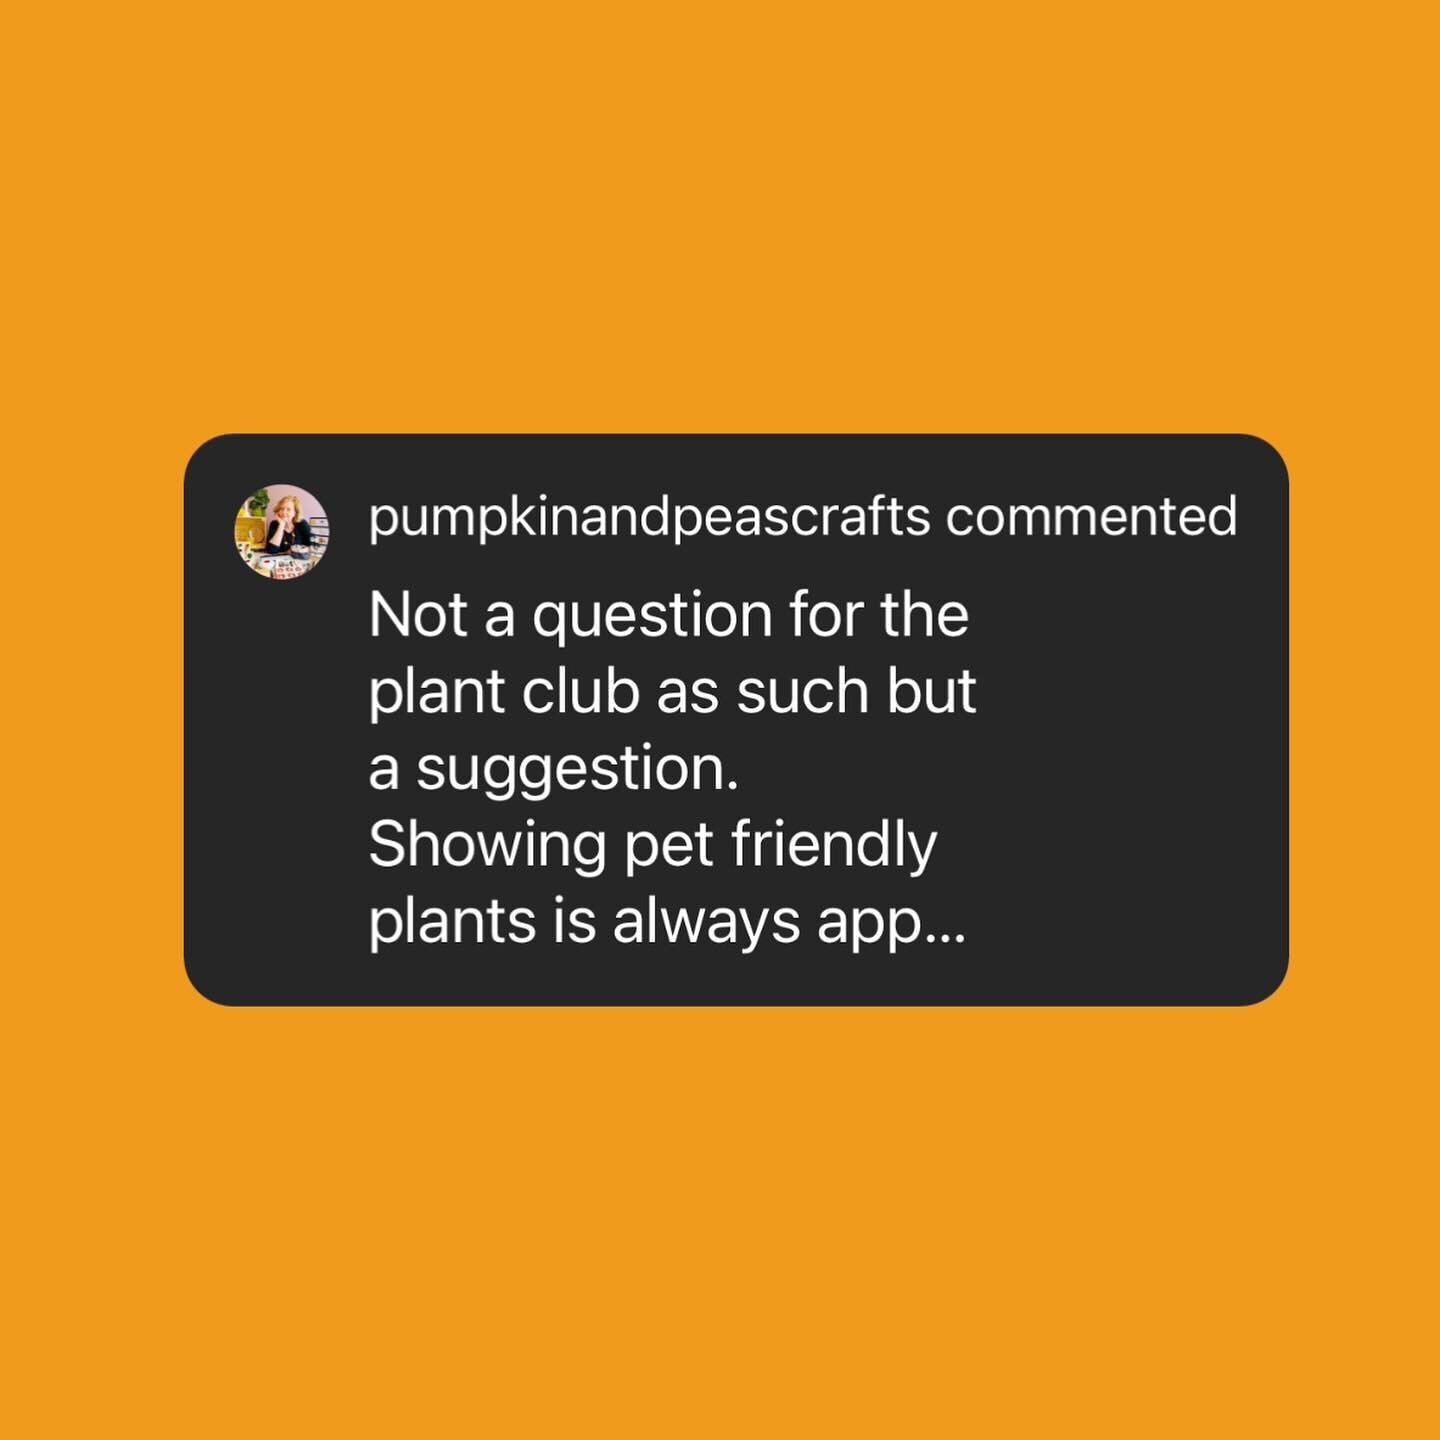 Yesterday we launched PLANT CLUB🍃 Thanks @pumpkinandpeascrafts for our first request&hellip; 
A very popular question pick is &ldquo;Which plants do we recommend are safe for pets&rdquo;

There are many pet-safe, non-toxic plant options for a green 